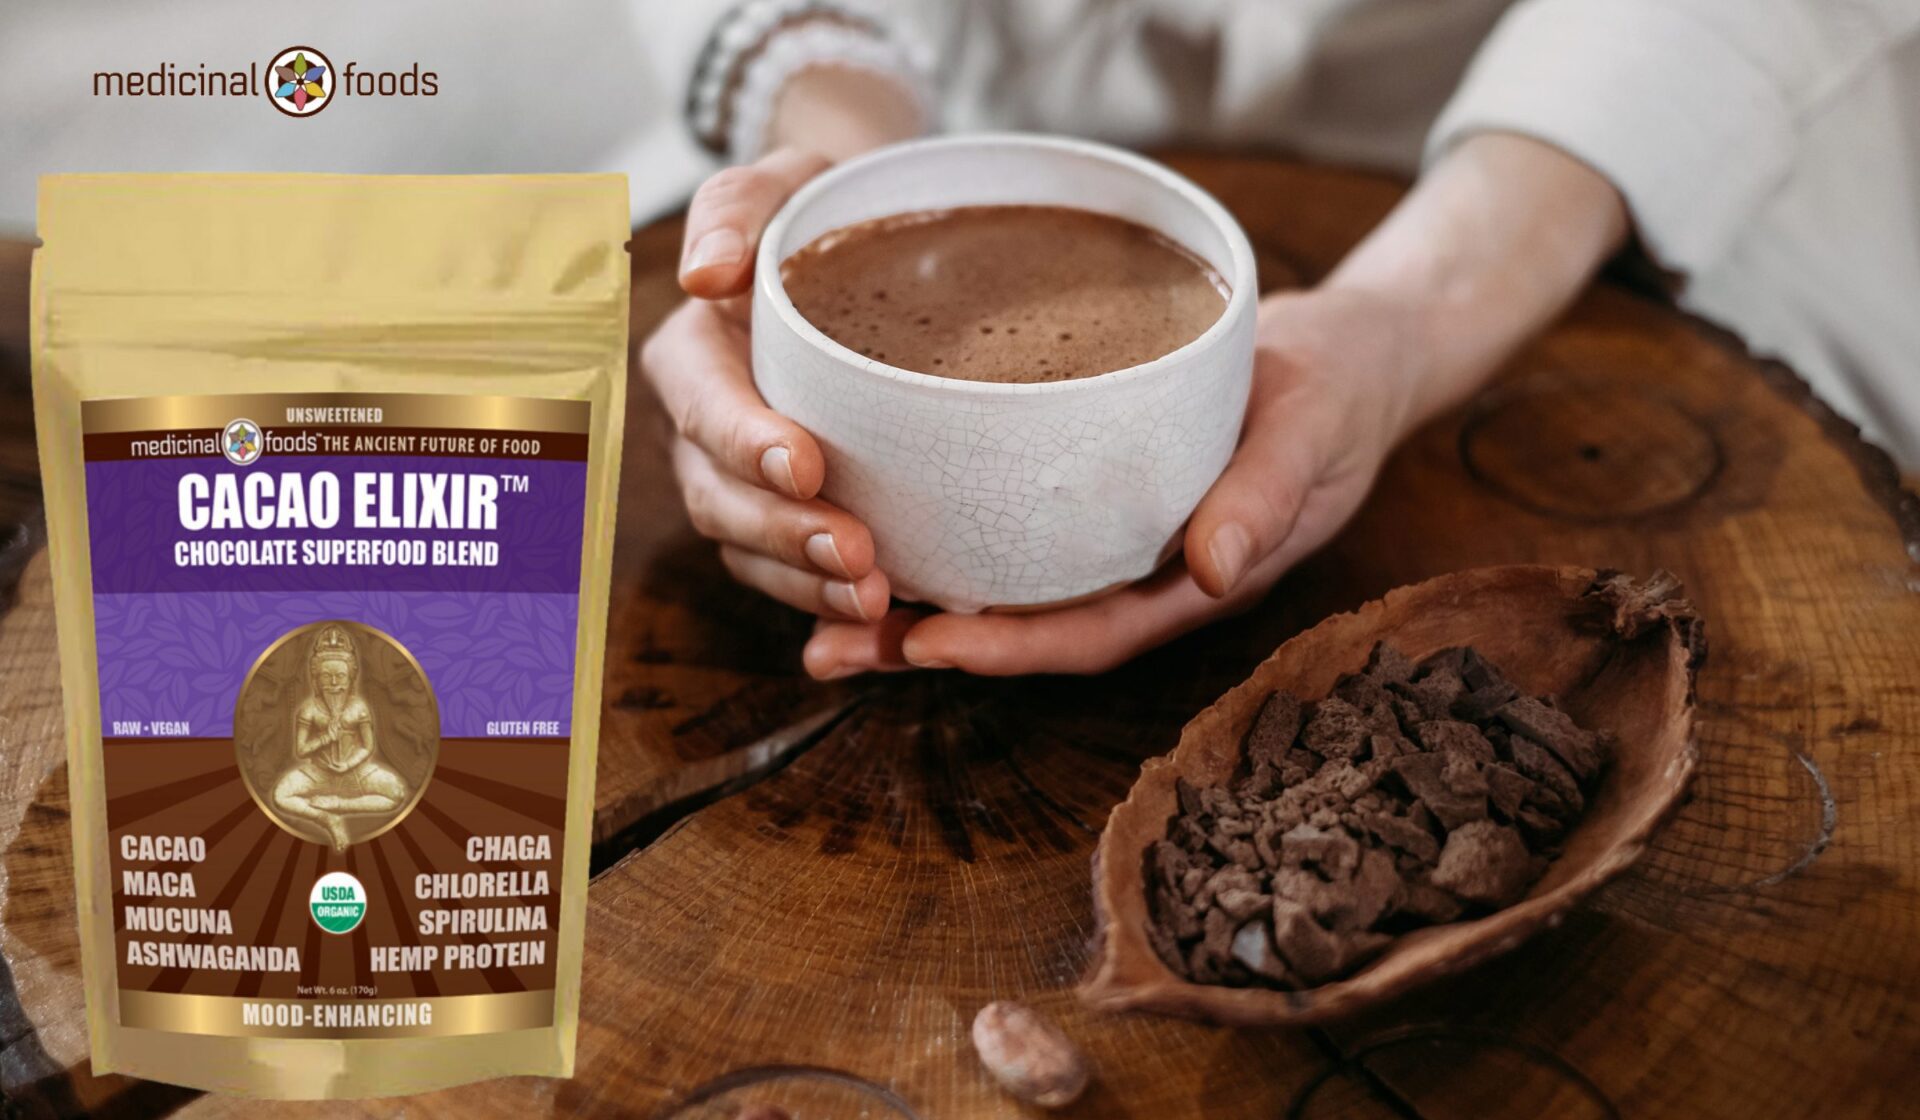 Organic Cacao Powder with highest polyphenol content - buy today and feel the boost